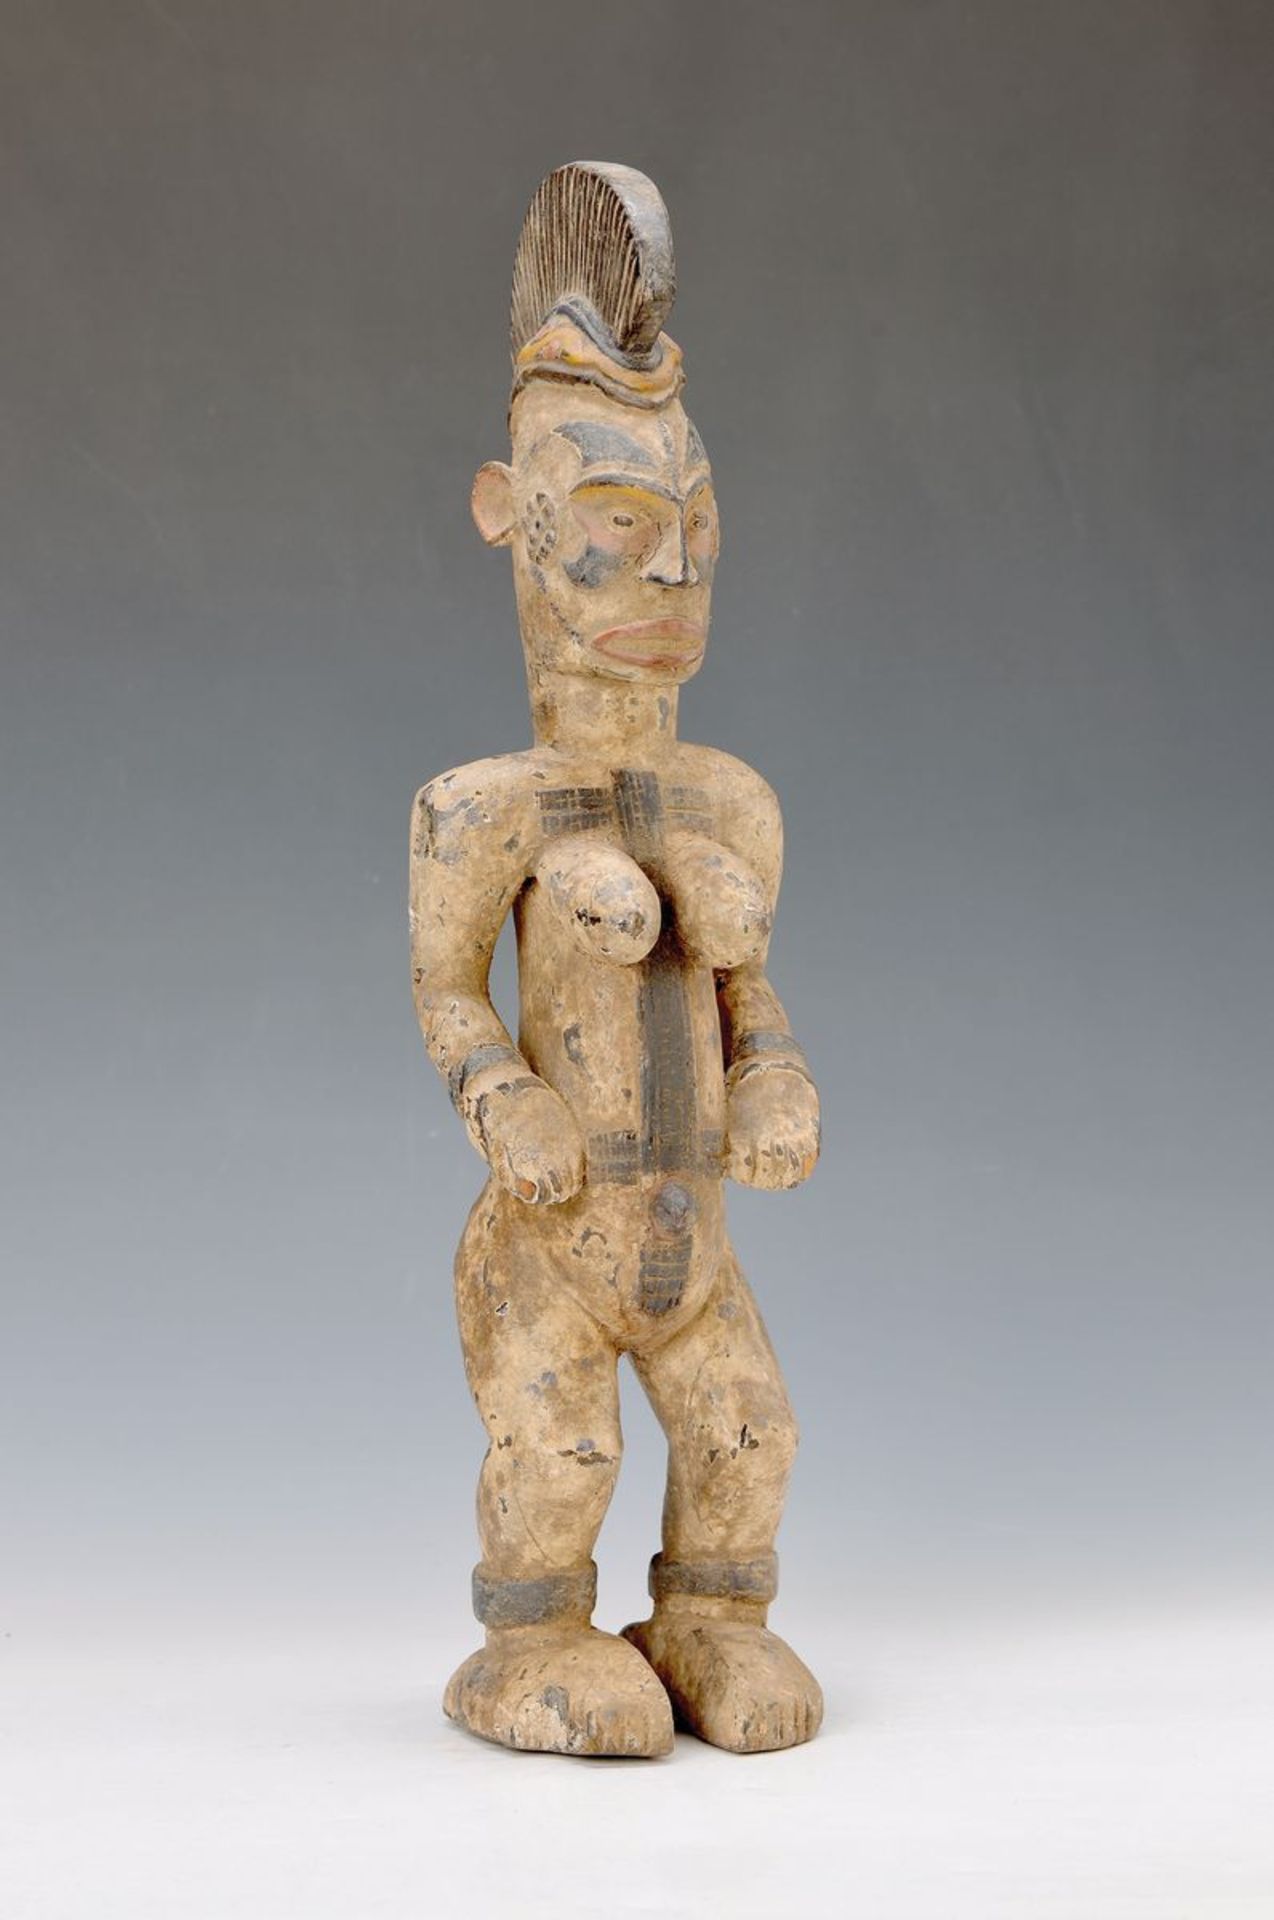 Ancestral sculpture, Ibo/Nigeria, approx. 50- 60 years old, in shape of a guardian, wood, colorful